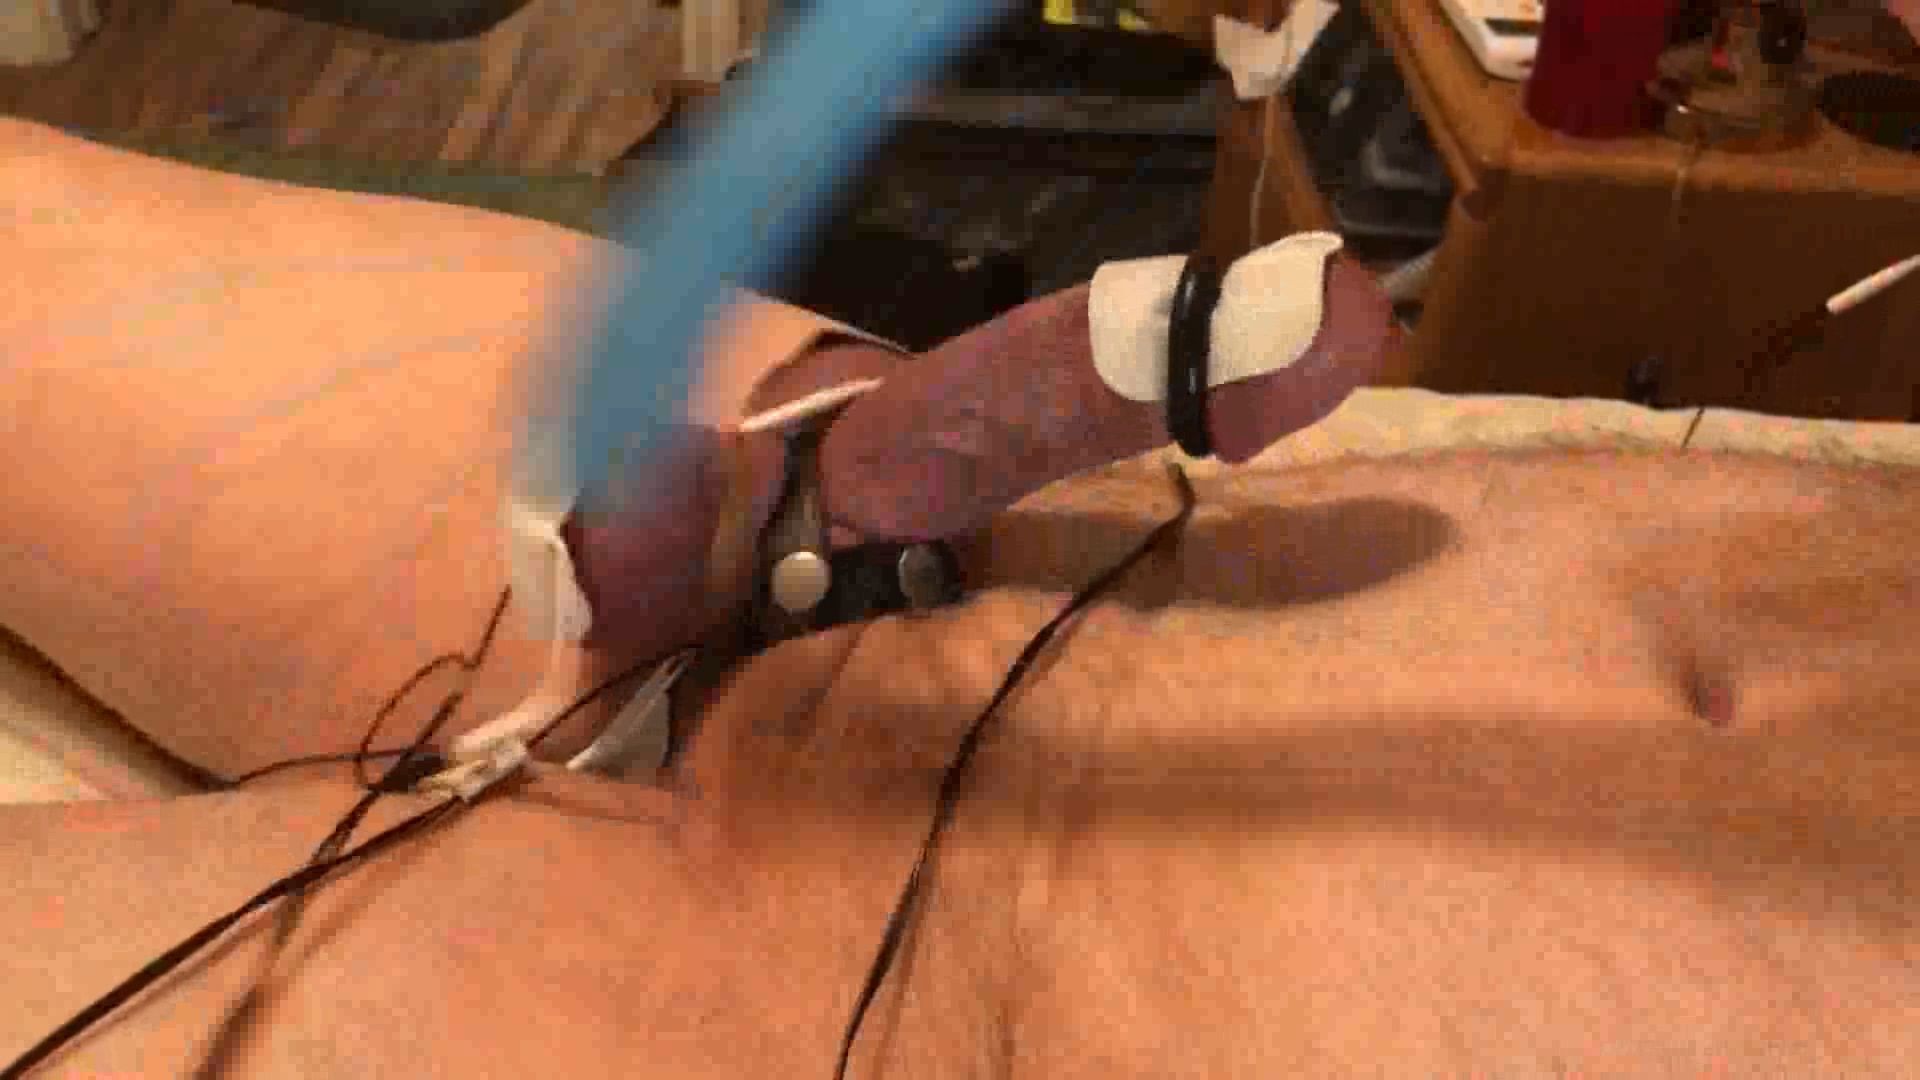 Cock twitches with estim pulse and precum flows as I slap an #11